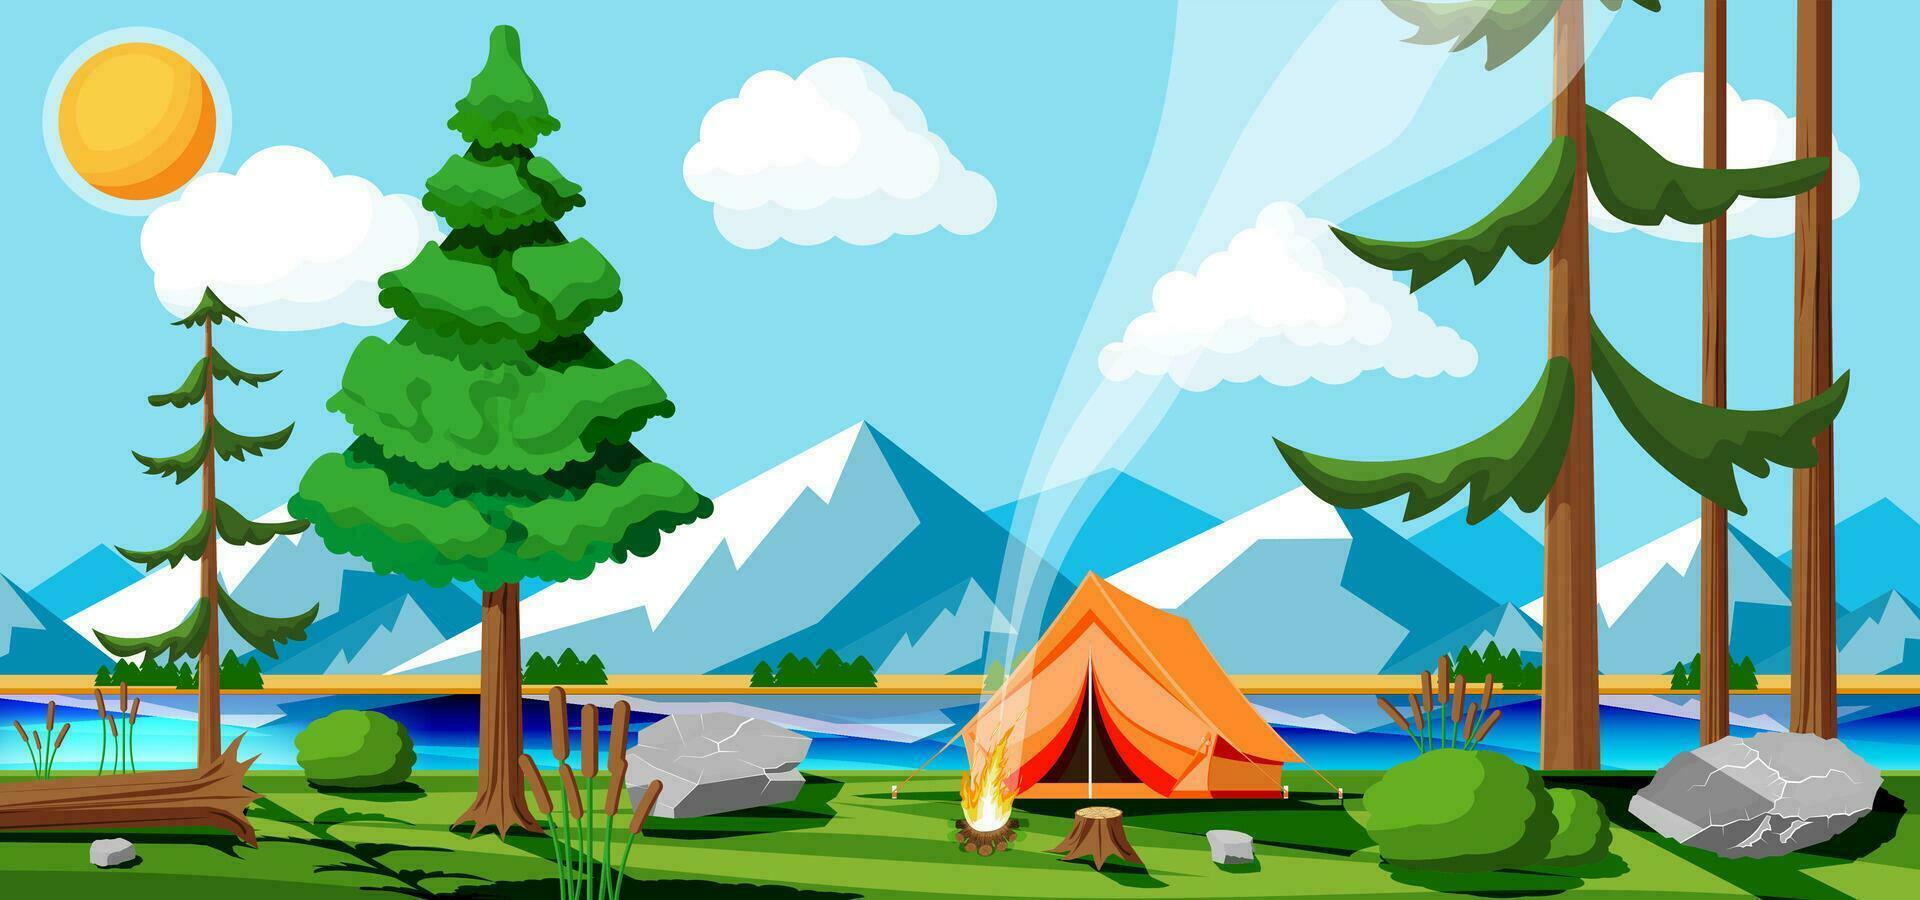 Meadow With Grass And Camping. Tents And Campfire. Summer Landscape Concept. Green Forest And Blue Sky. Countryside Rolling Hills, Lake And Mountains. Trees On The Horizon. Flat Vector Illustration